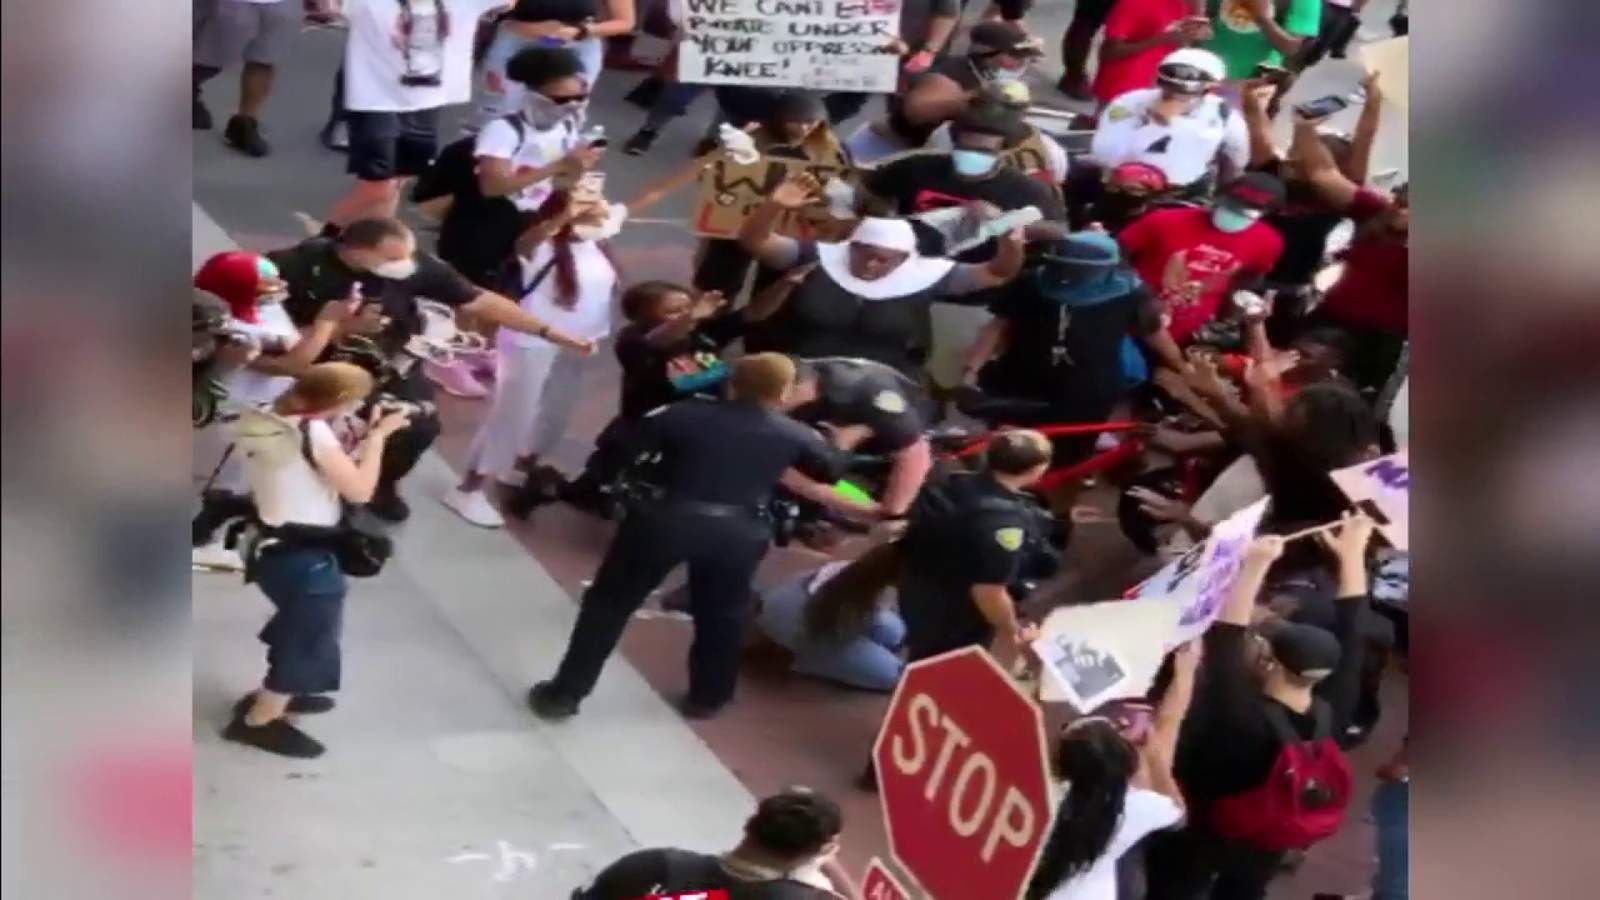 Florida police officer suspended for pushing kneeling woman during protests